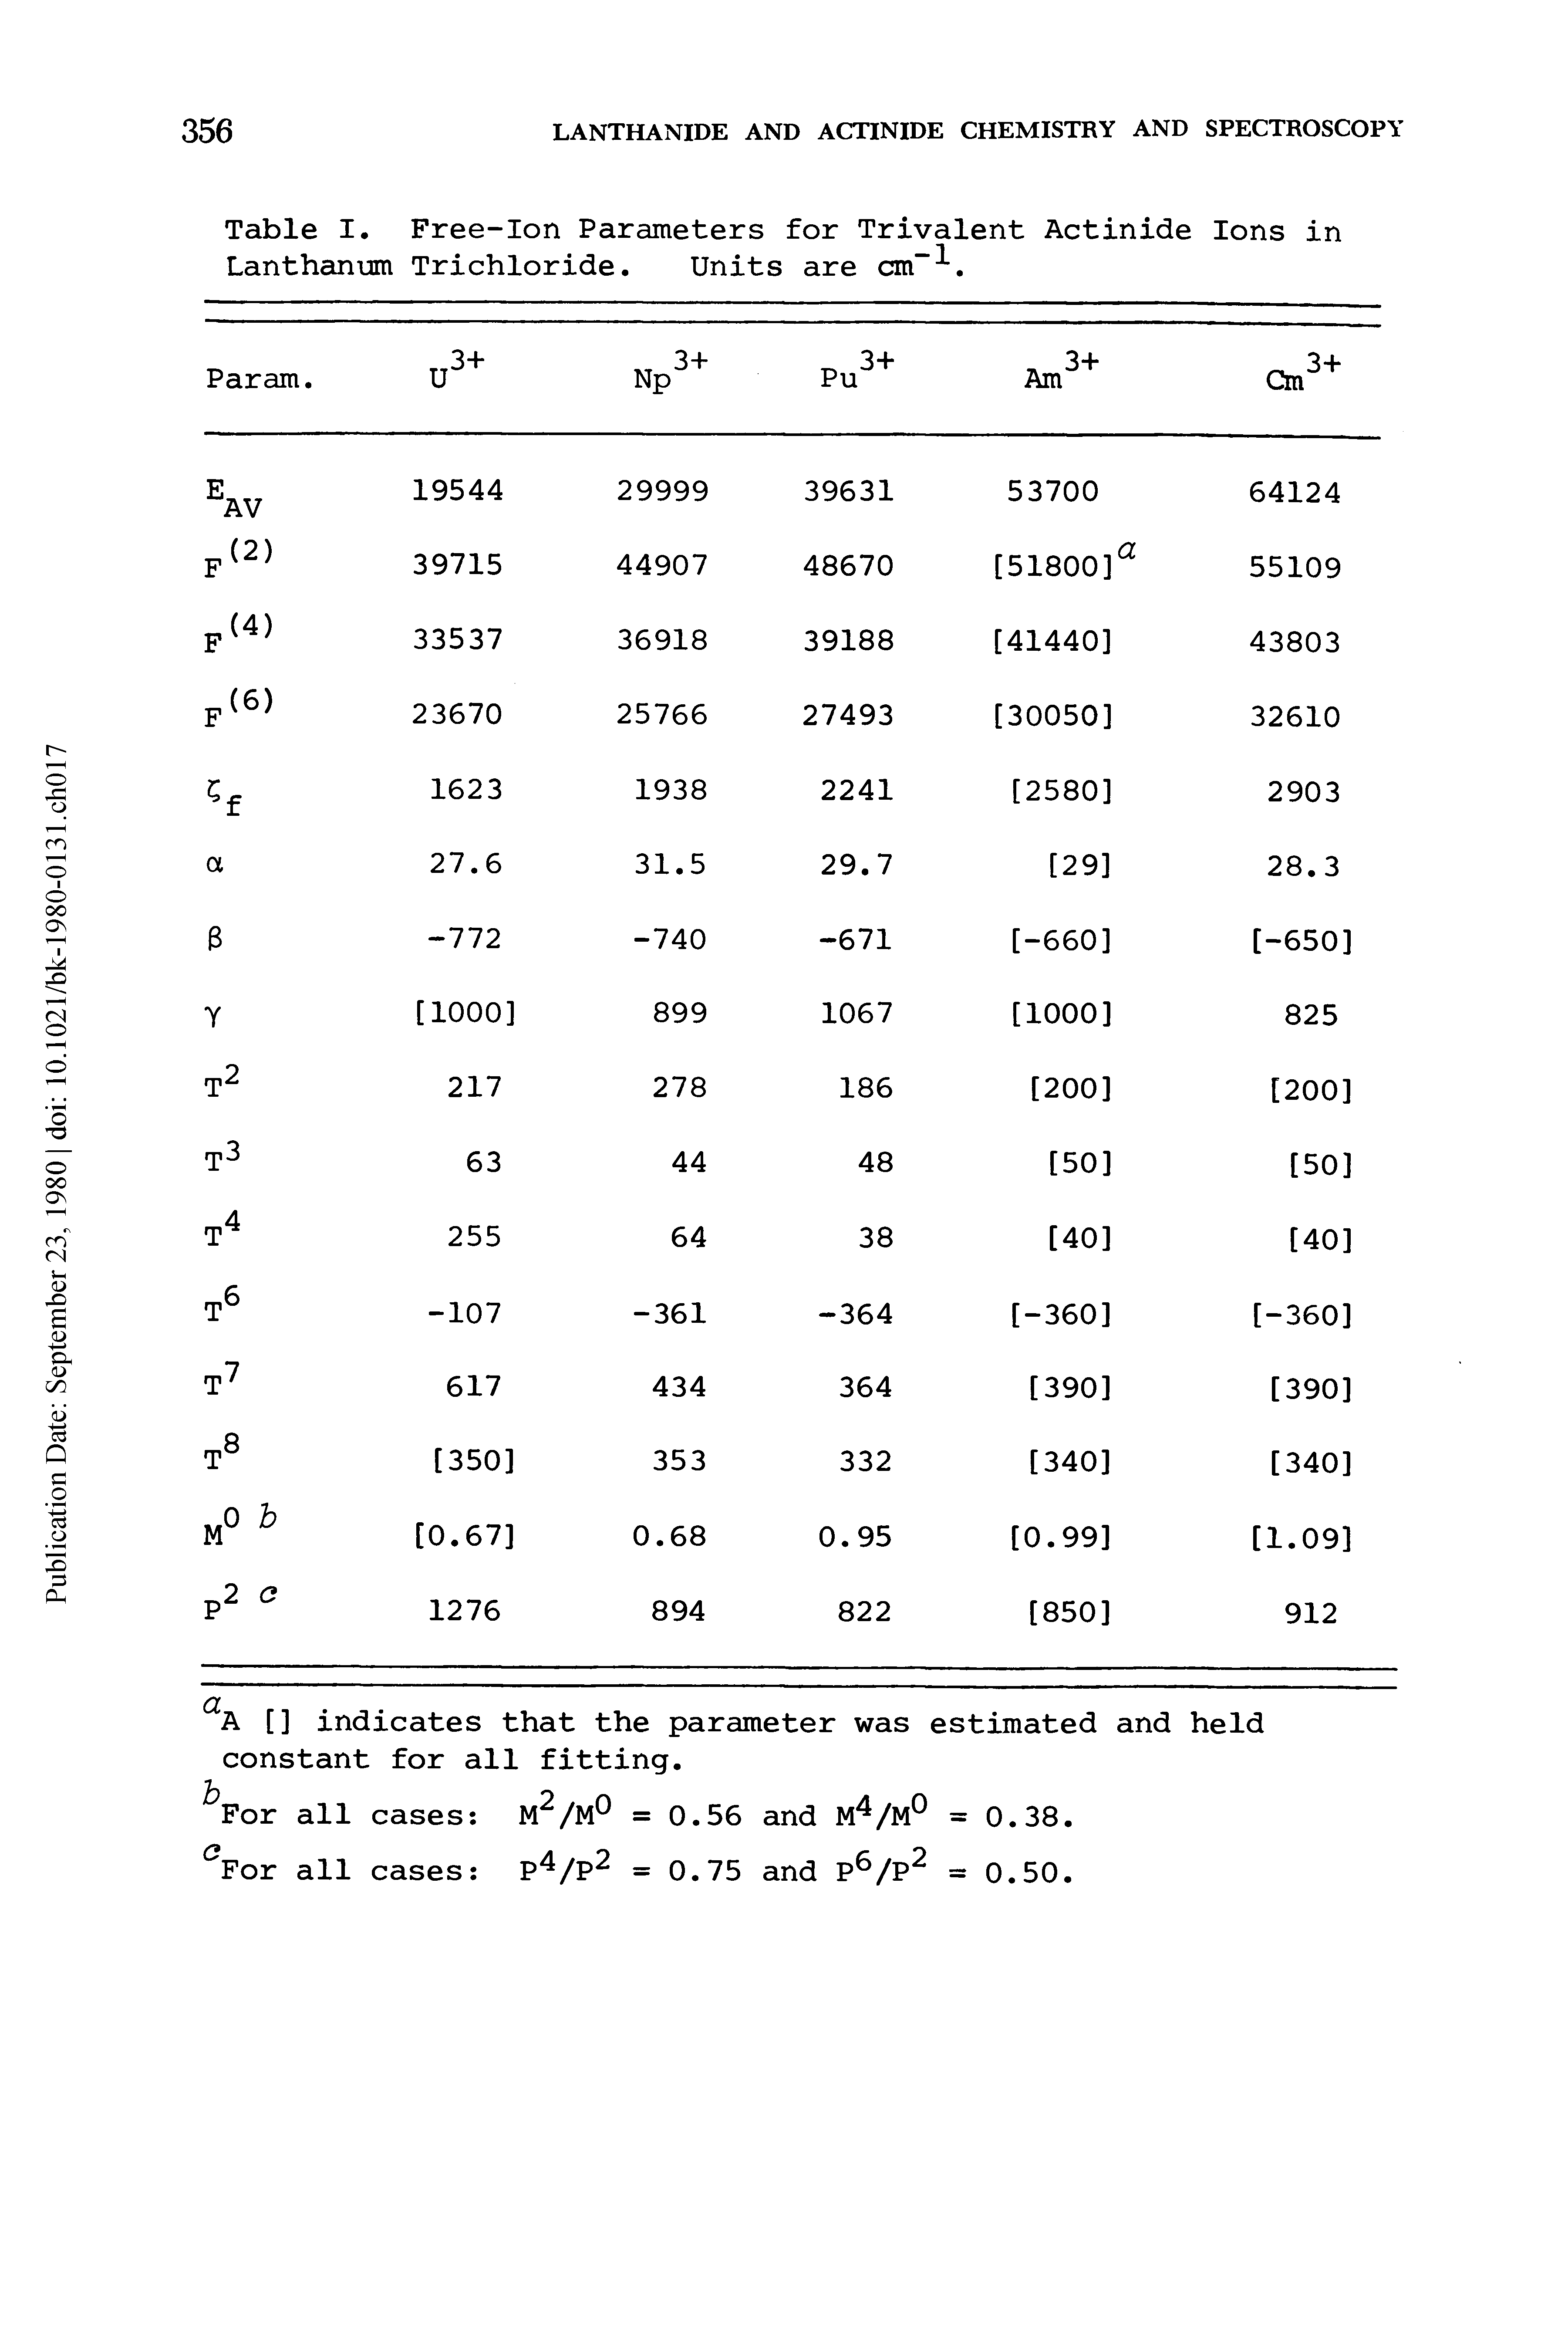 Table I. Free-Ion Parameters for Trivalent Actinide Ions in Lanthanum Trichloride. Units are cm-- -.